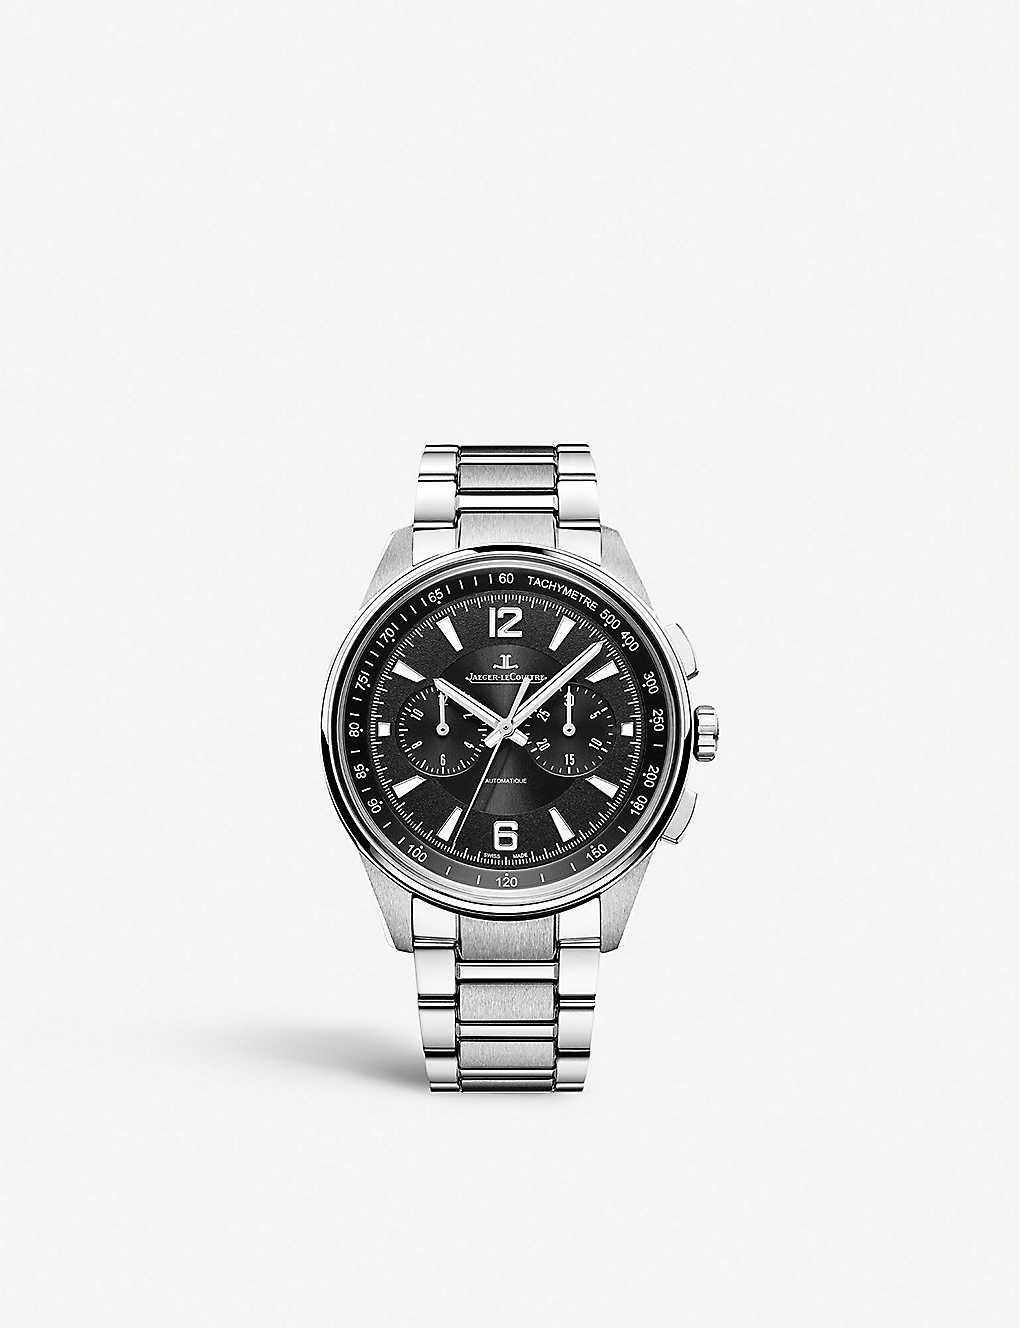 Q9028170 Polaris stainless-steel automatic watch - 1